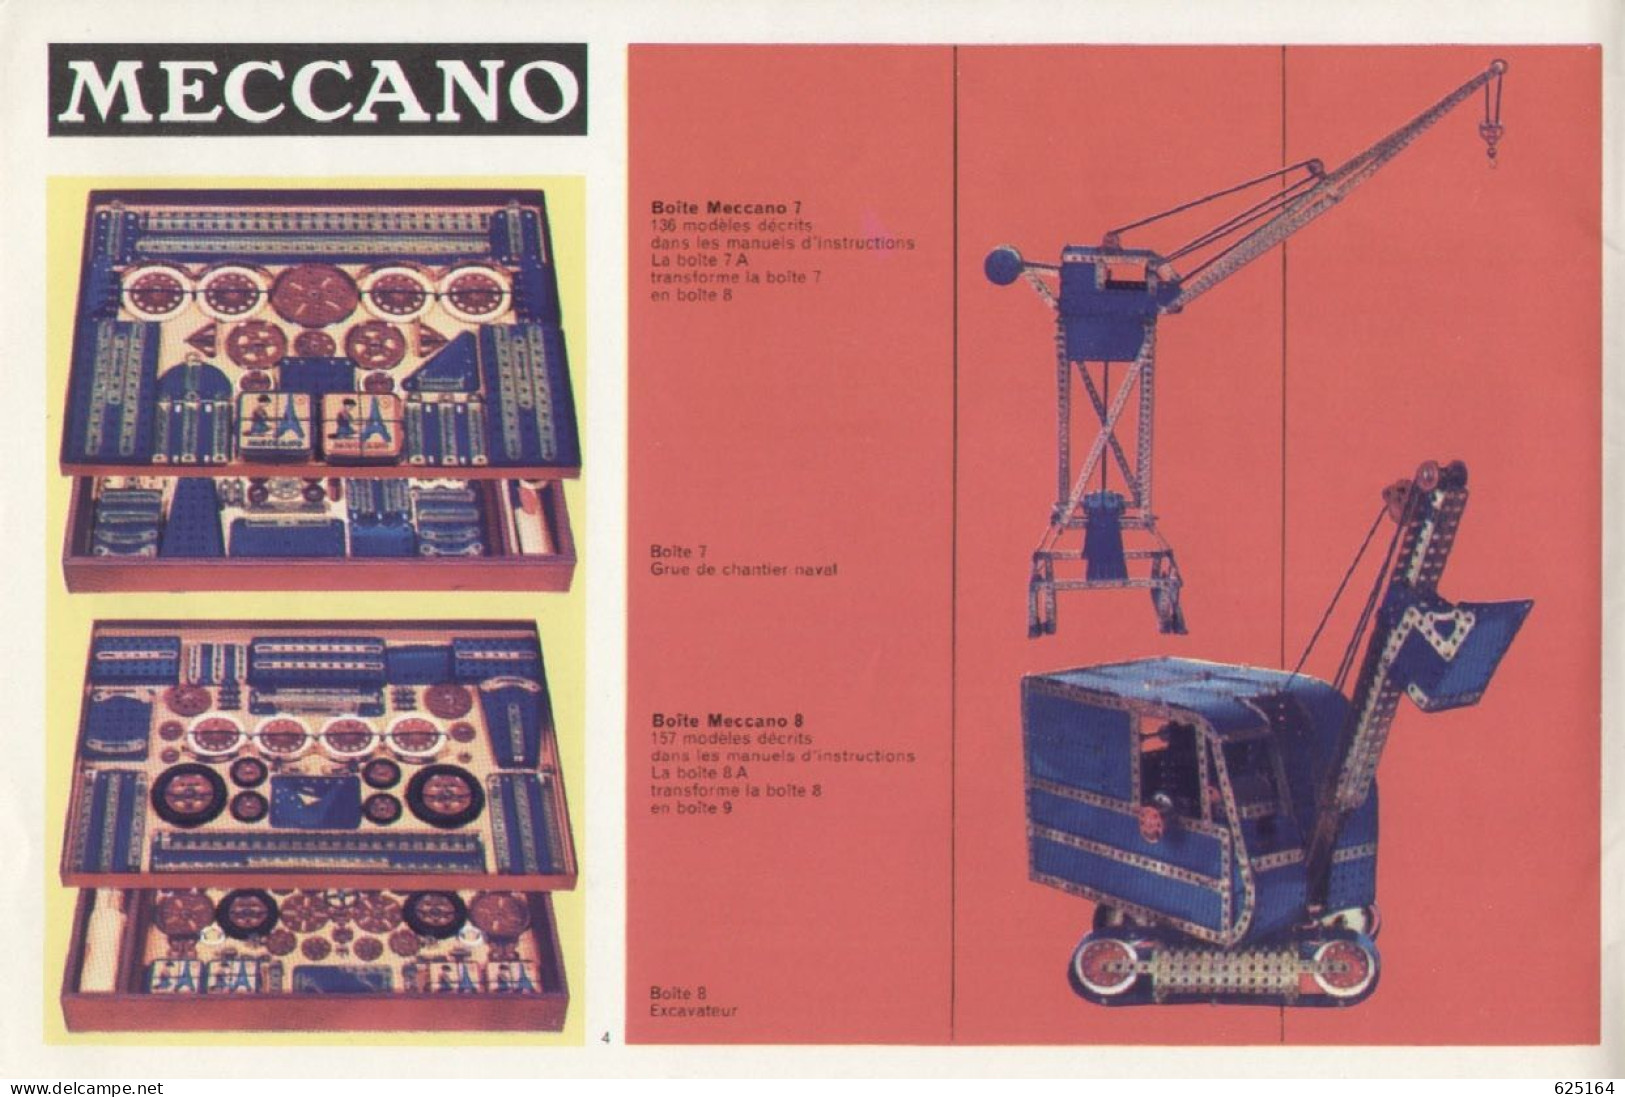 Catalogue HOrnby-acHO 1960/61 MECCANO HORNBY OO DINKY TOYS + Prix FF - Frans